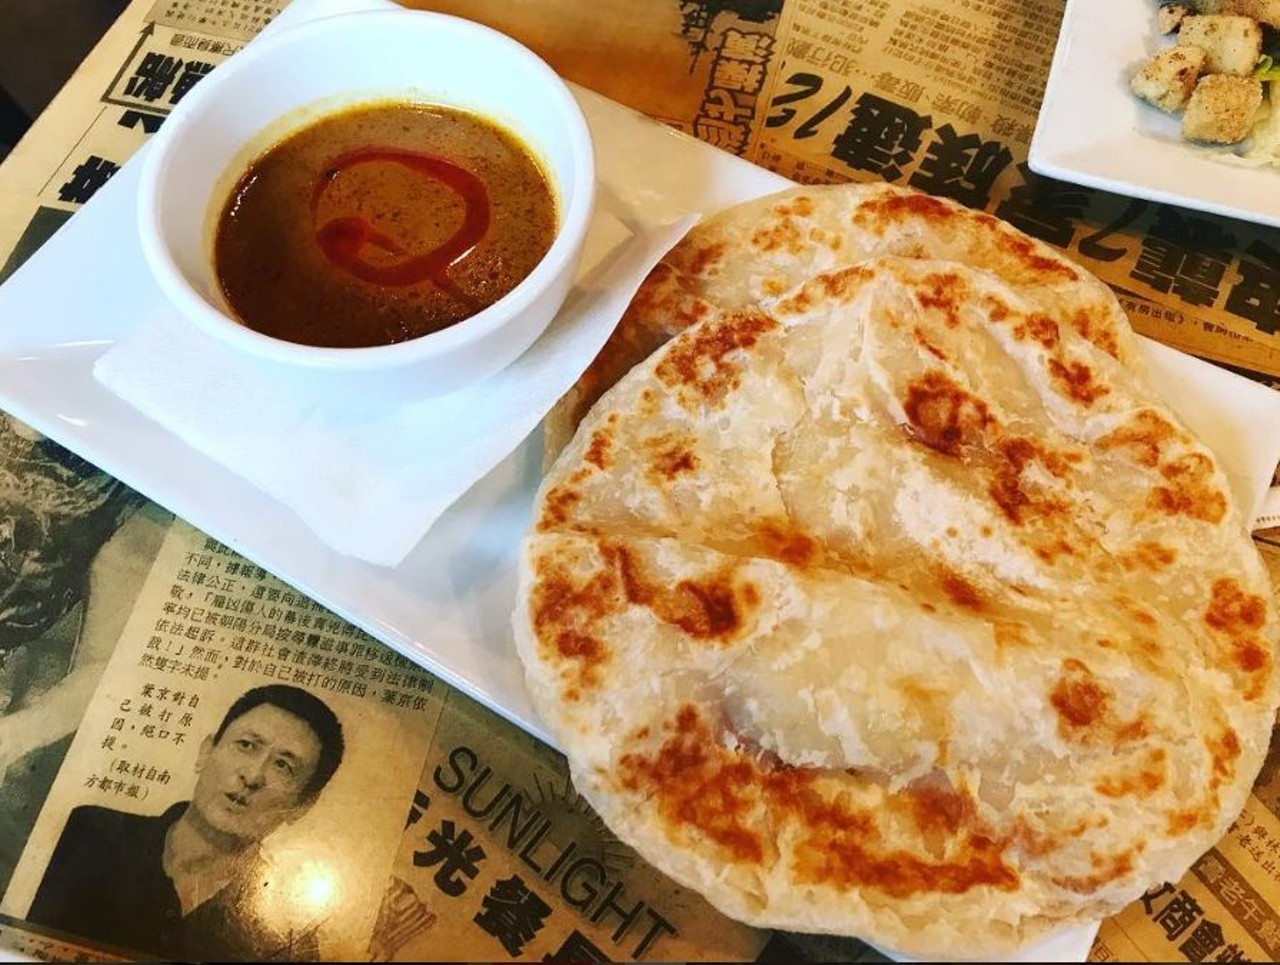 Roti canai from Hawkers Asian Street Fare
1103 N. Mills Ave., 407-237-0606 
The real appeal of the Malaysian flatbread dish may be in the spicy curry dipping sauce. You might think you can resist multiple servings of the flatbread, but chances are you'll cave after the first bite.
Photo via ravenousclaw/Instagram